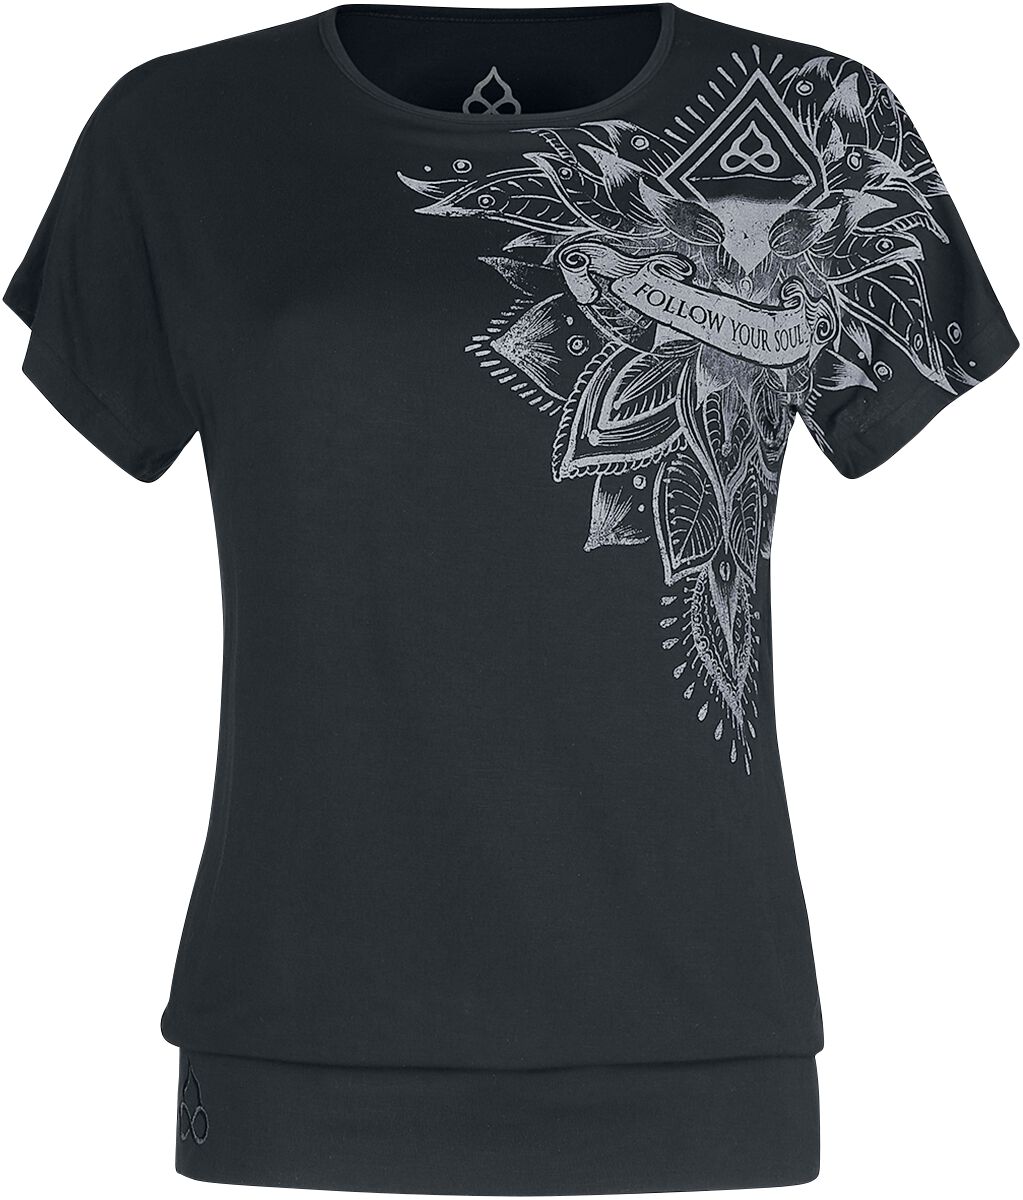 Image of T-Shirt di EMP Special Collection - Sport and Yoga - Casual Black T-shirt with Detailed Print - M a 4XL - Donna - nero